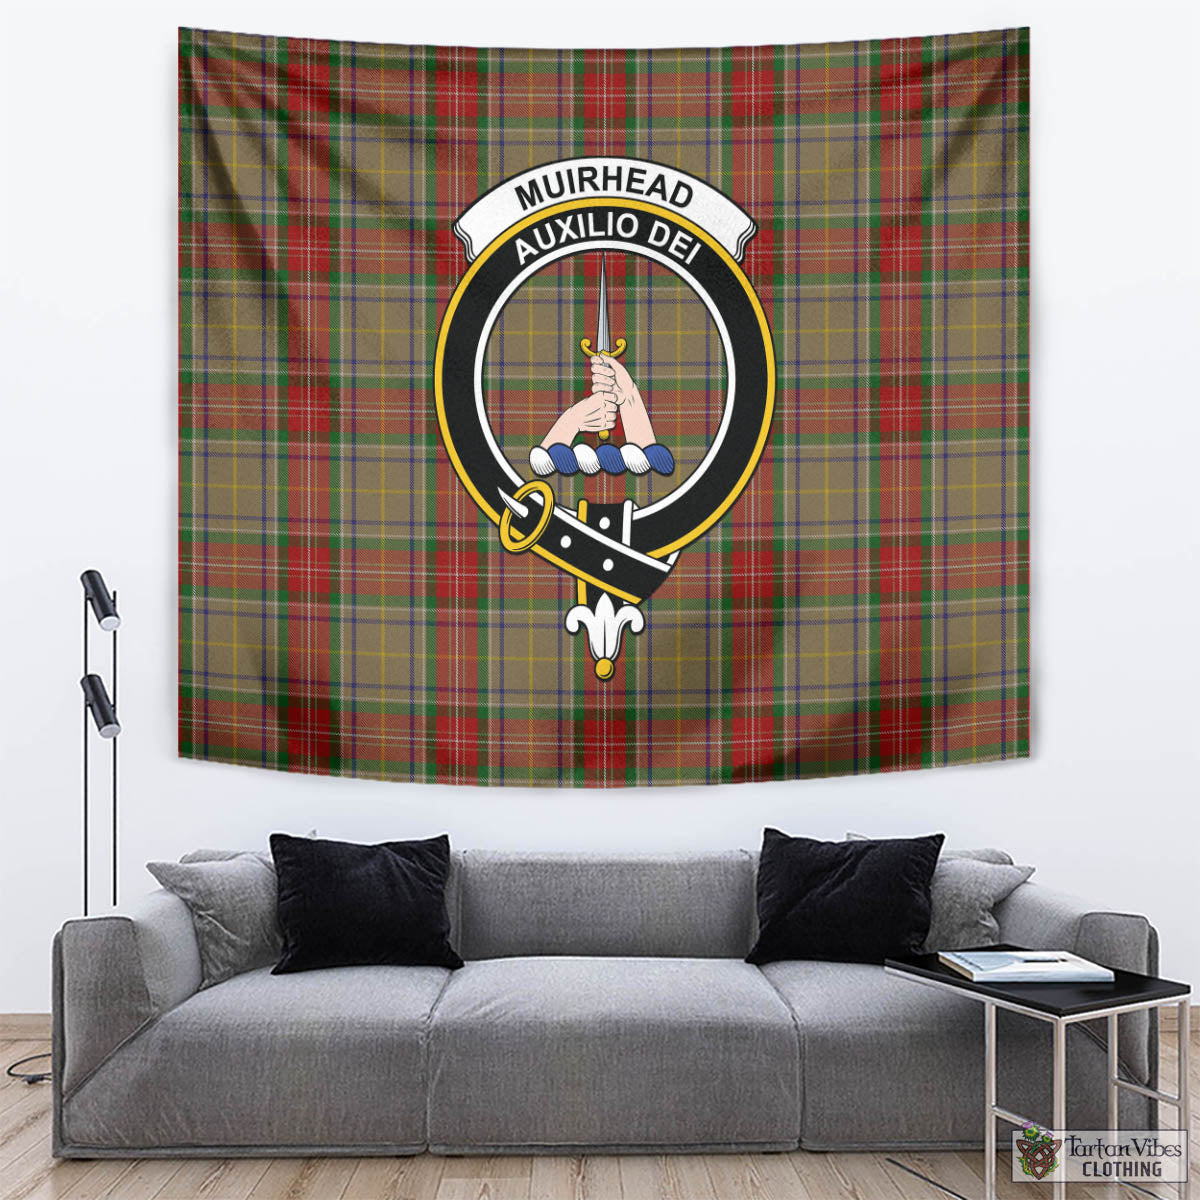 Tartan Vibes Clothing Muirhead Old Tartan Tapestry Wall Hanging and Home Decor for Room with Family Crest